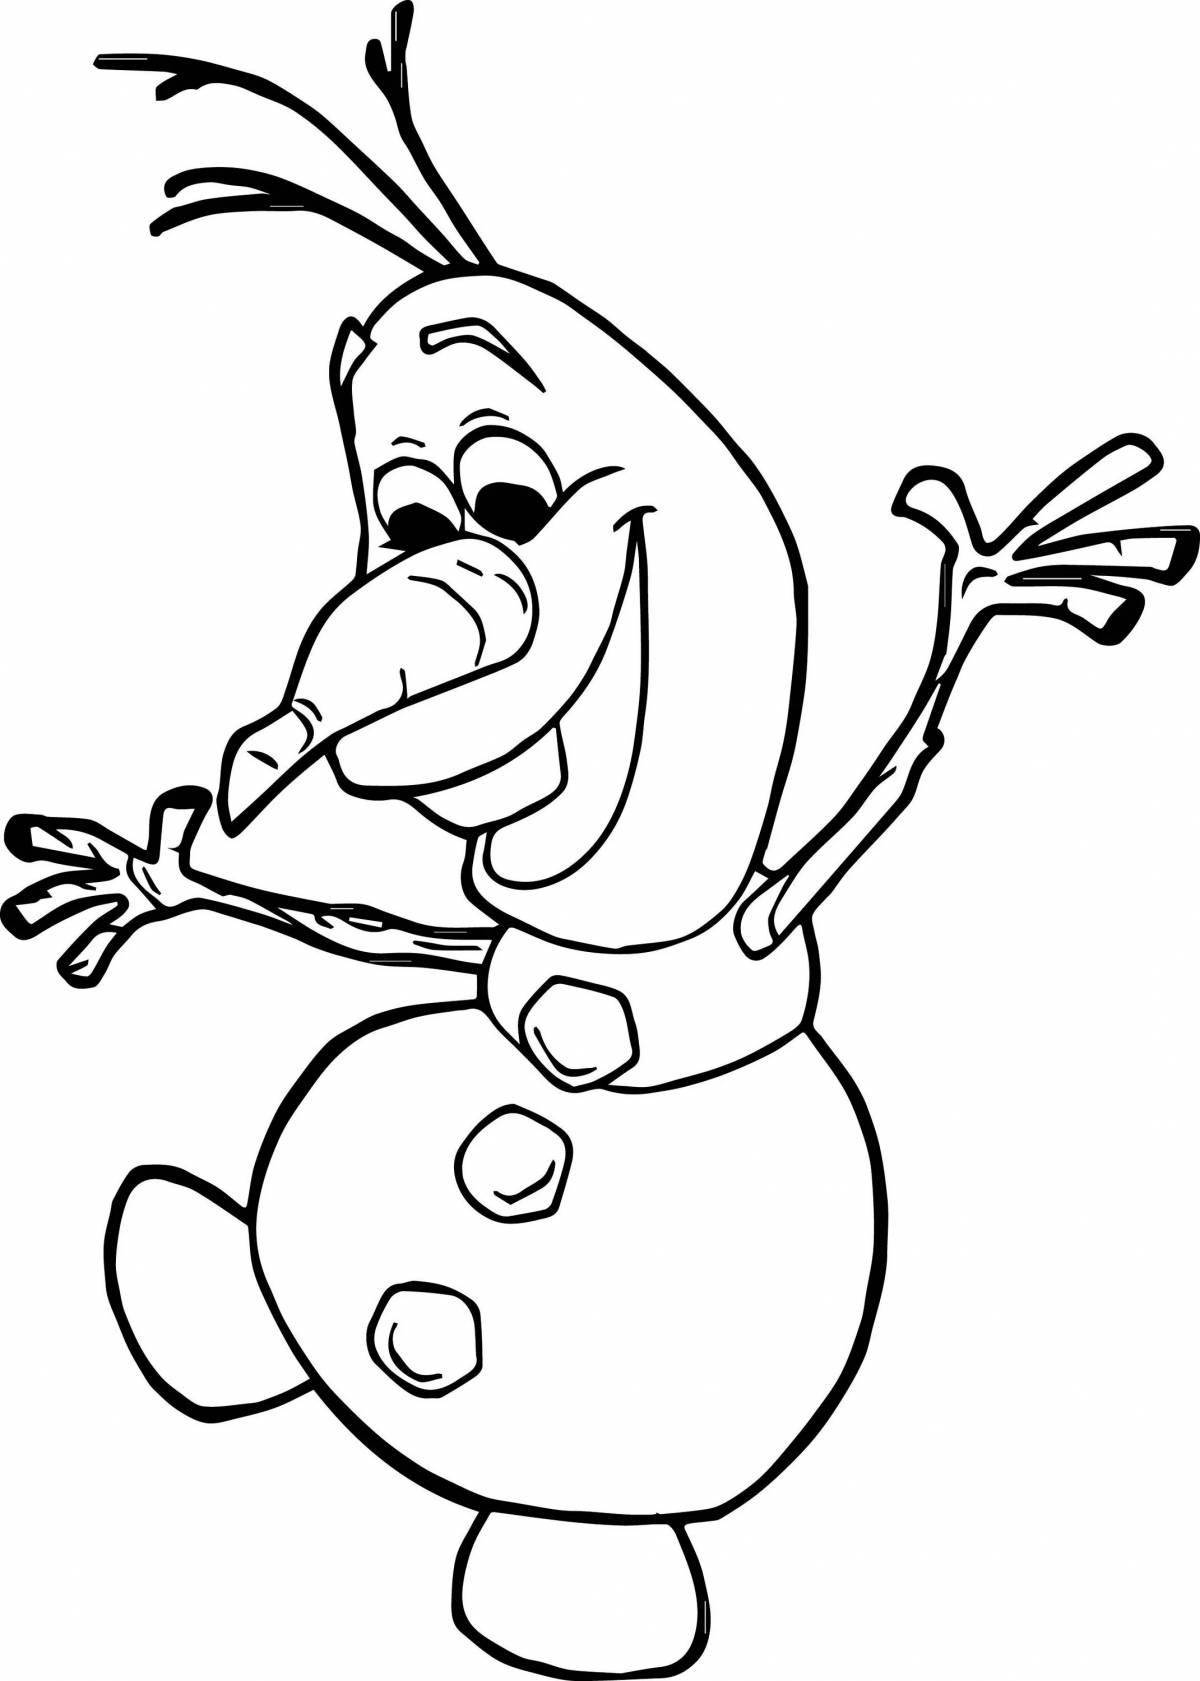 Olaf's cold heart shiny coloring book